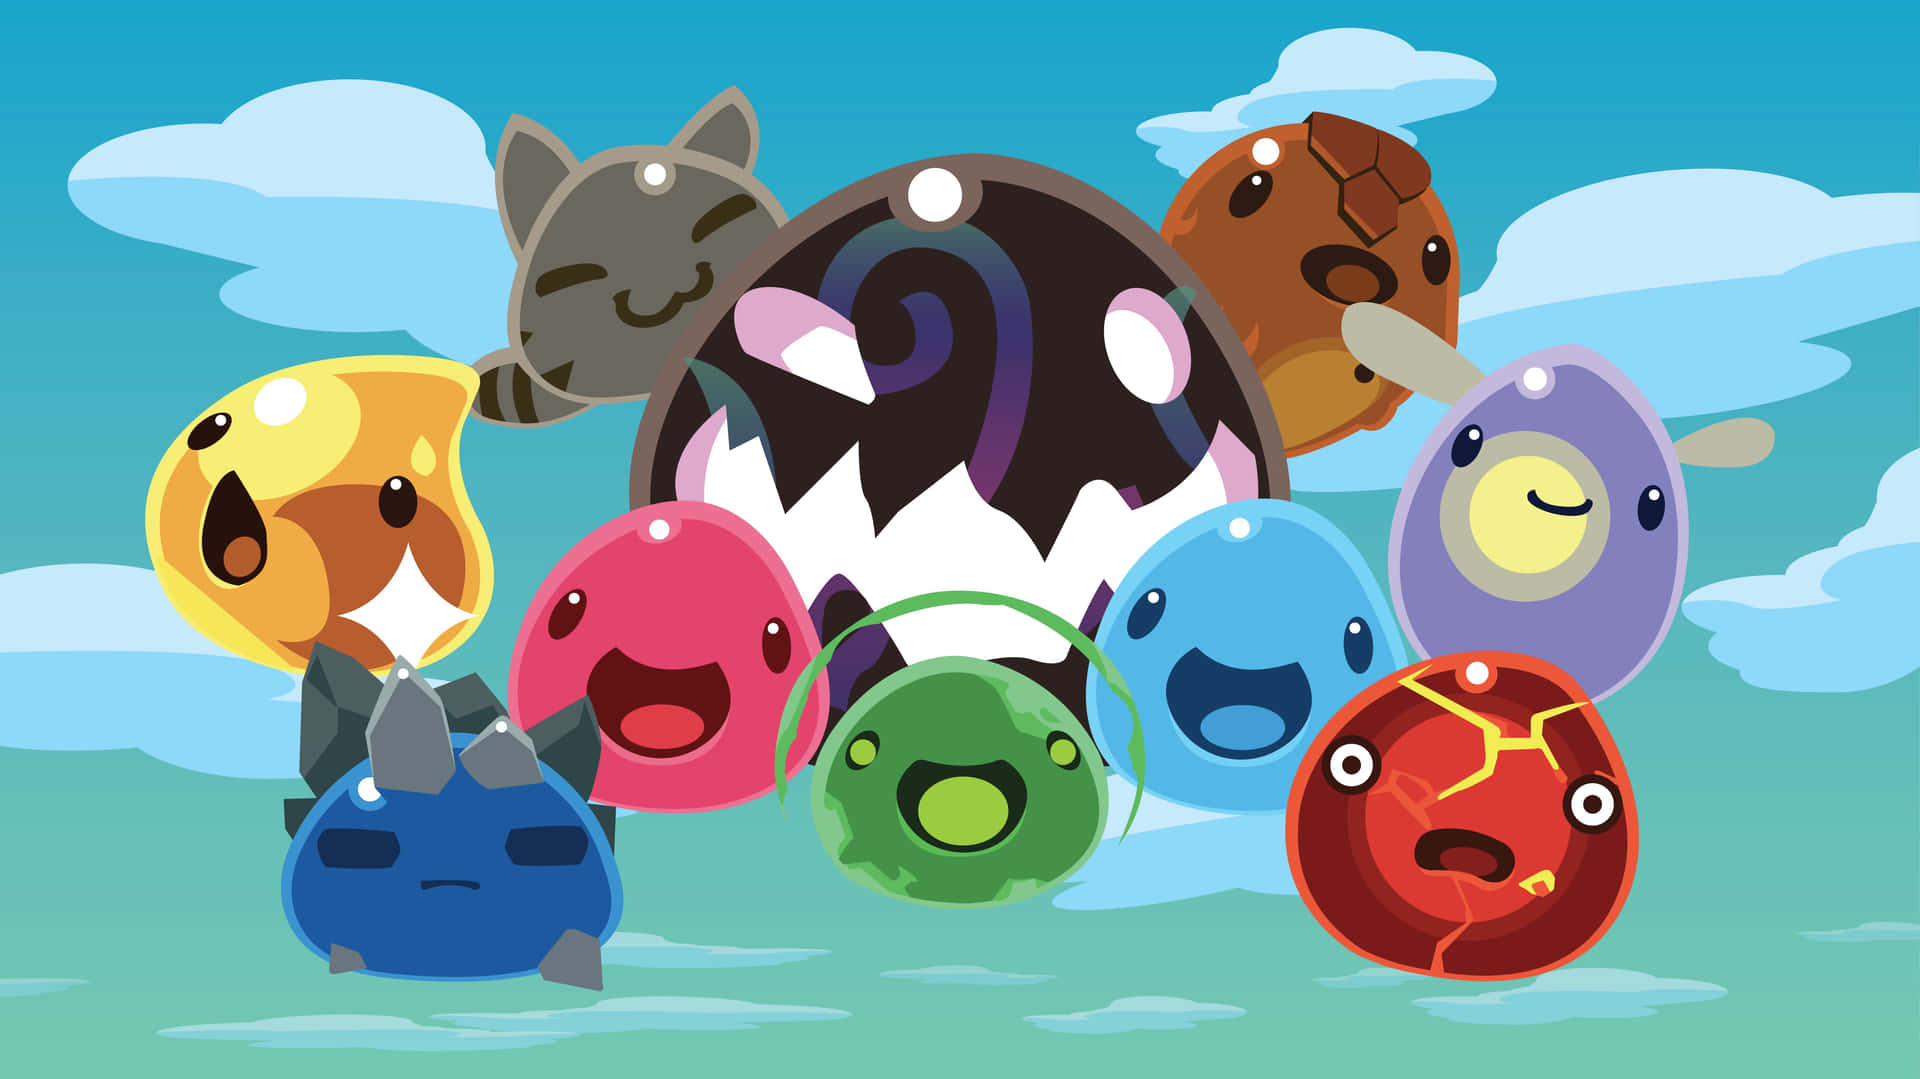 Enjoy the fun and adventure of Slime Rancher! Wallpaper